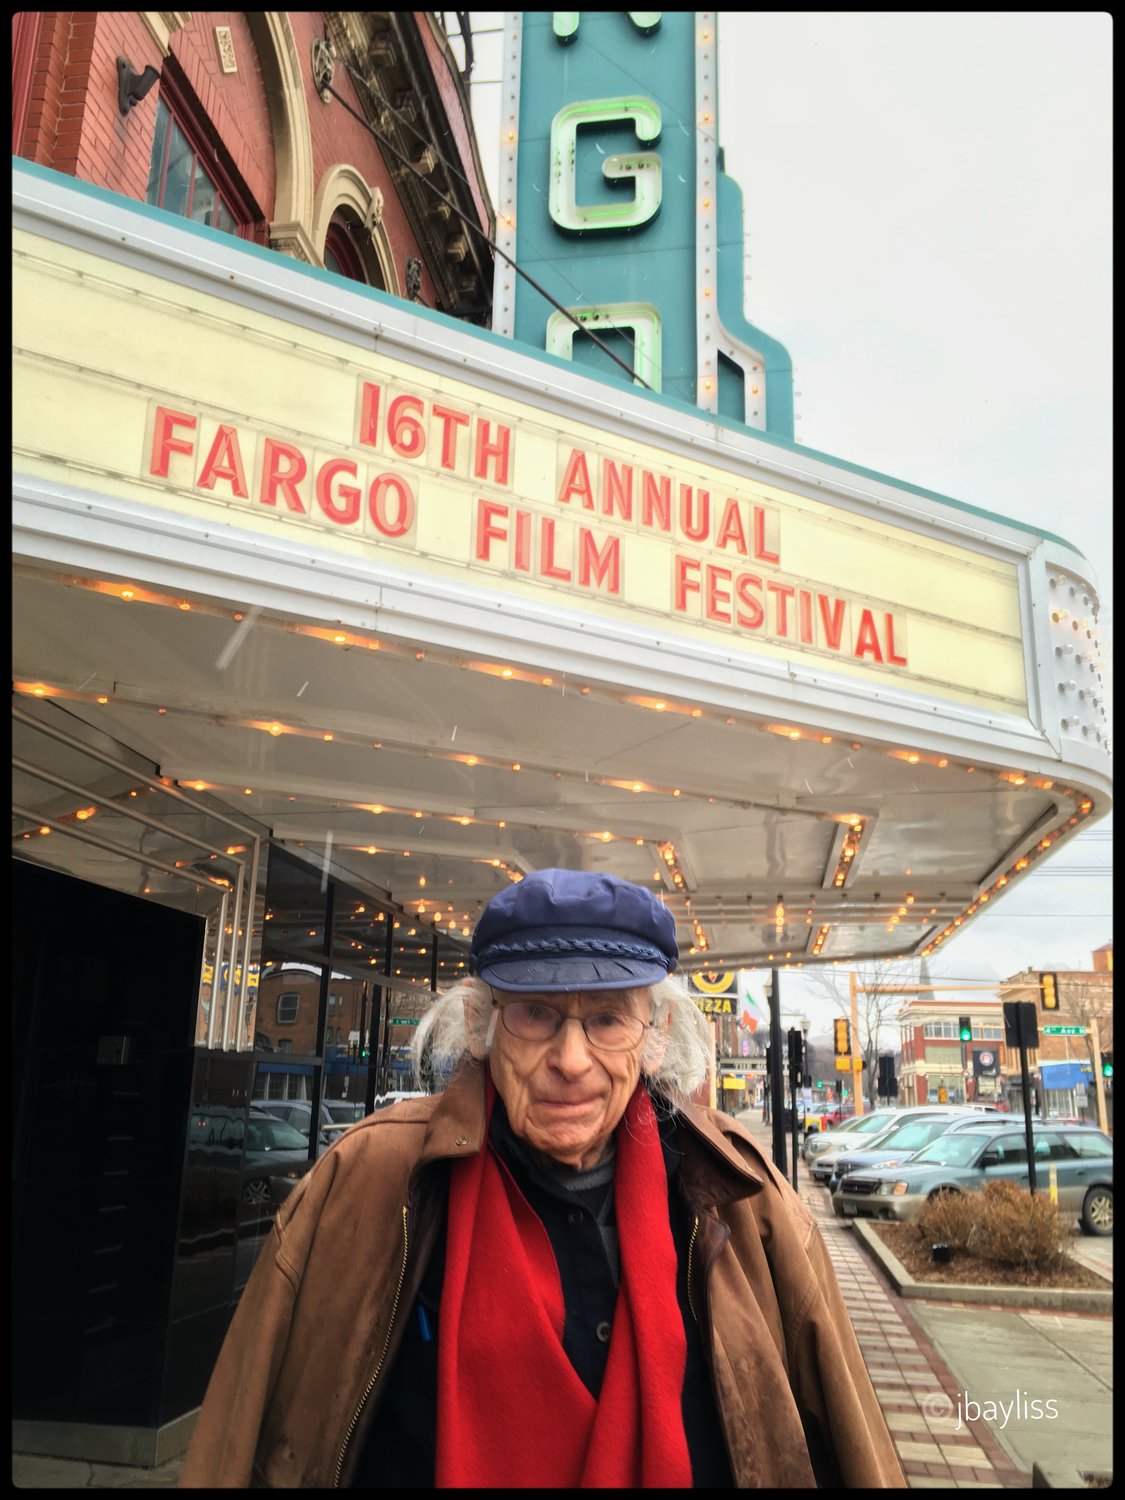 Al Milgrom taught film at the University of Minnesota and founded the U Film Society in the 1960s. In time, his efforts produced what became the Minneapolis-St. Paul International Film Festival. (Photo by Janet Bayliss)